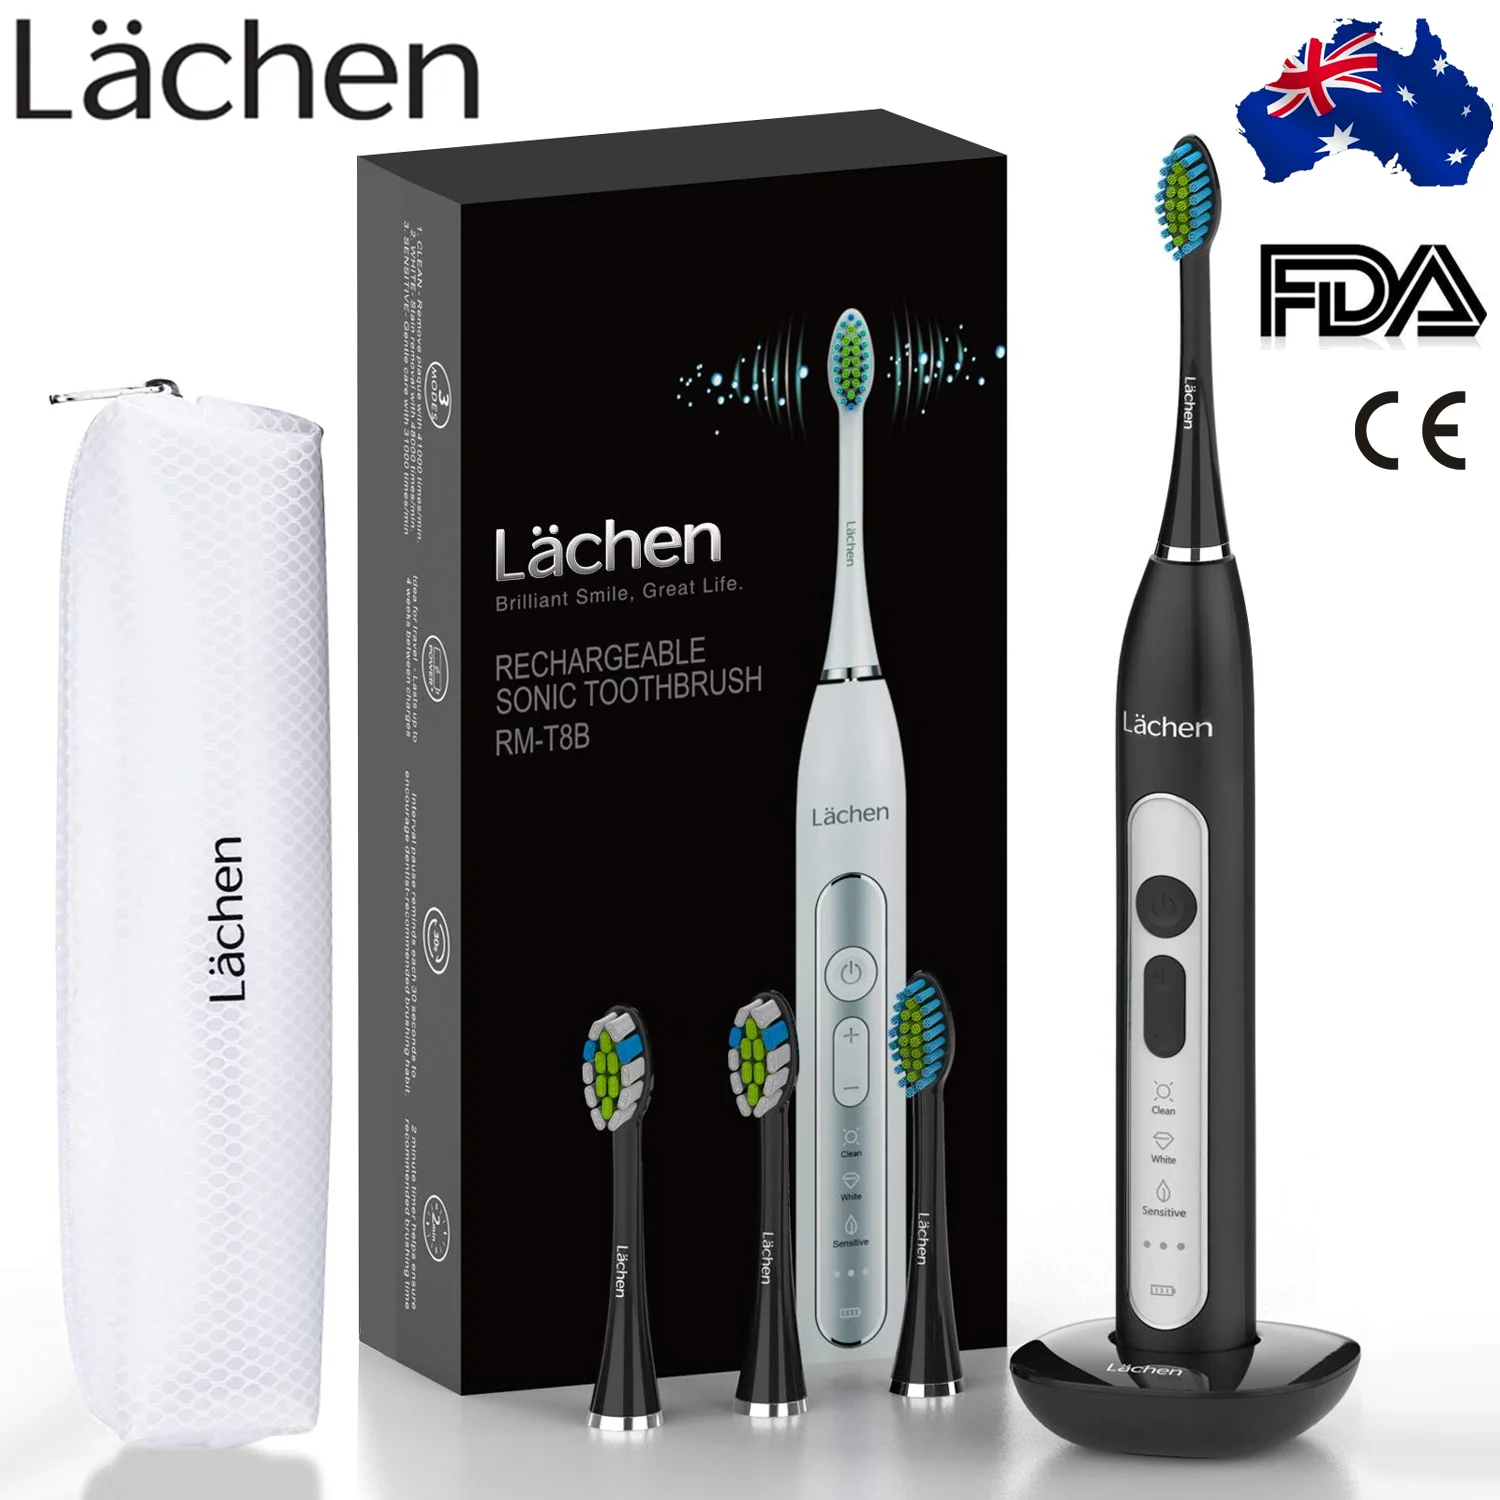 

Lachen T8 Sonic Electric Toothbrush Rechargeable USB Charger Ultrasonic Teeth Brush for Adults 4 Replacement Heads fast shipping